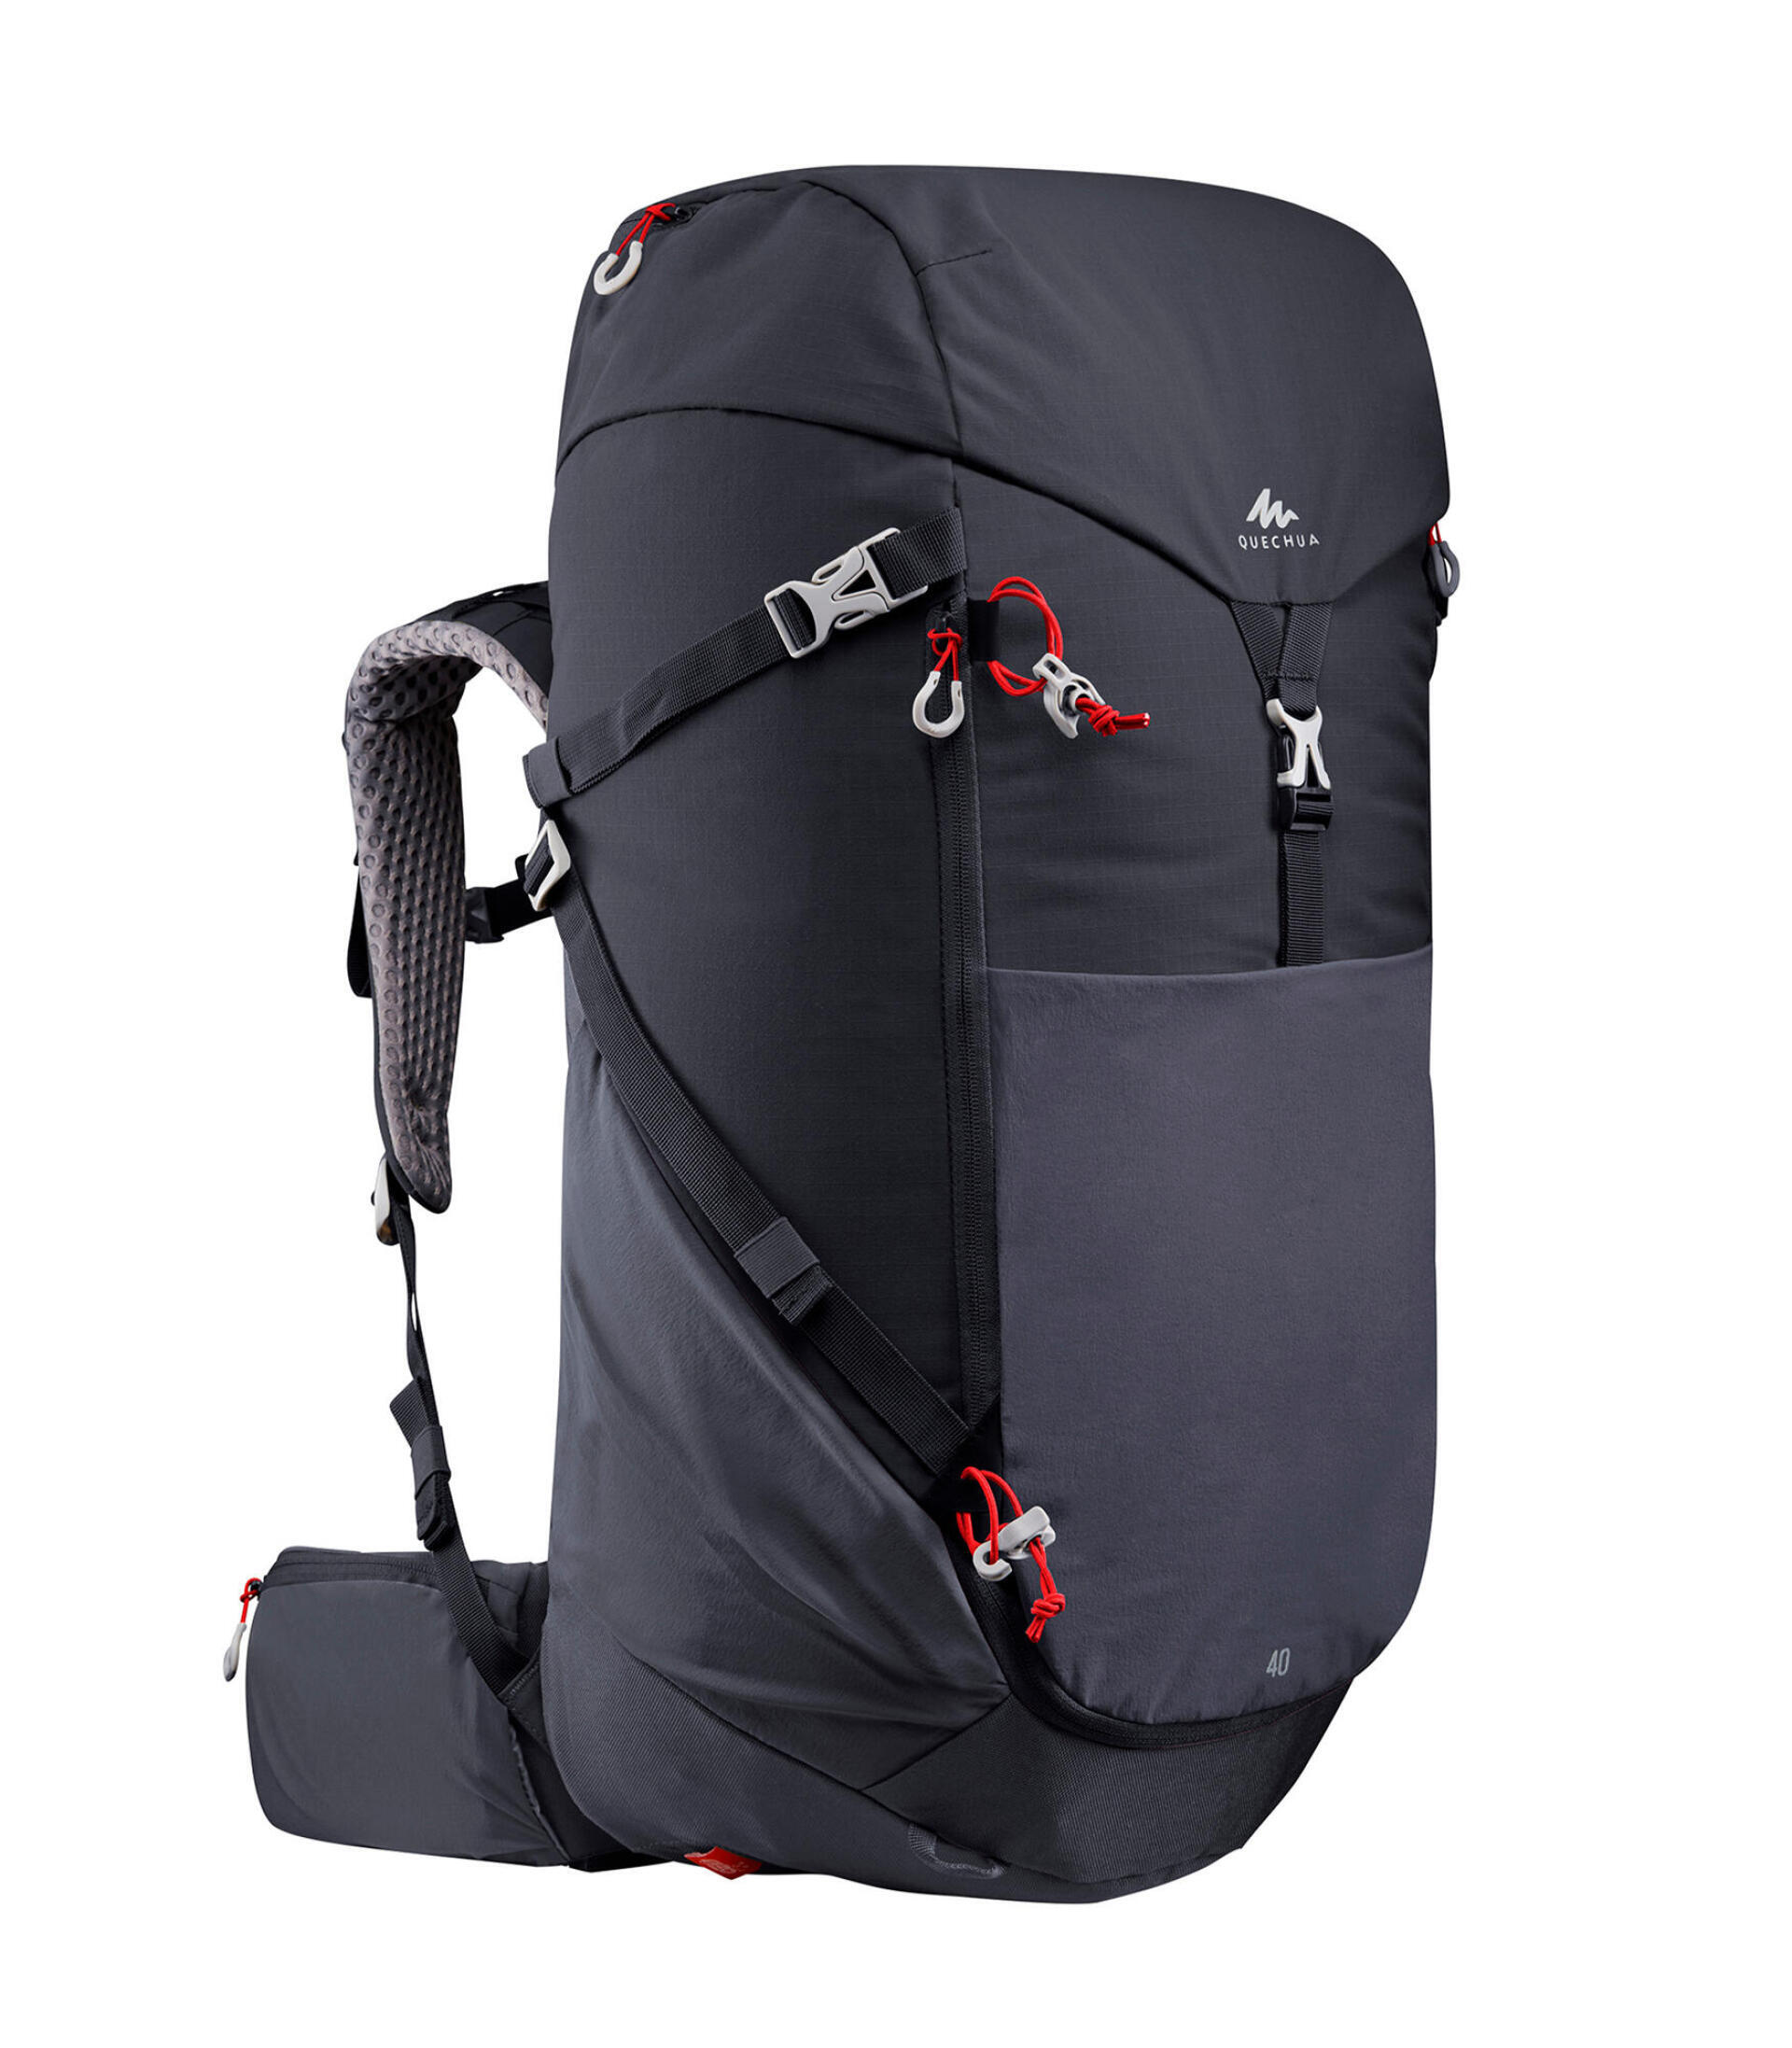 Choosing your bag for a day hike